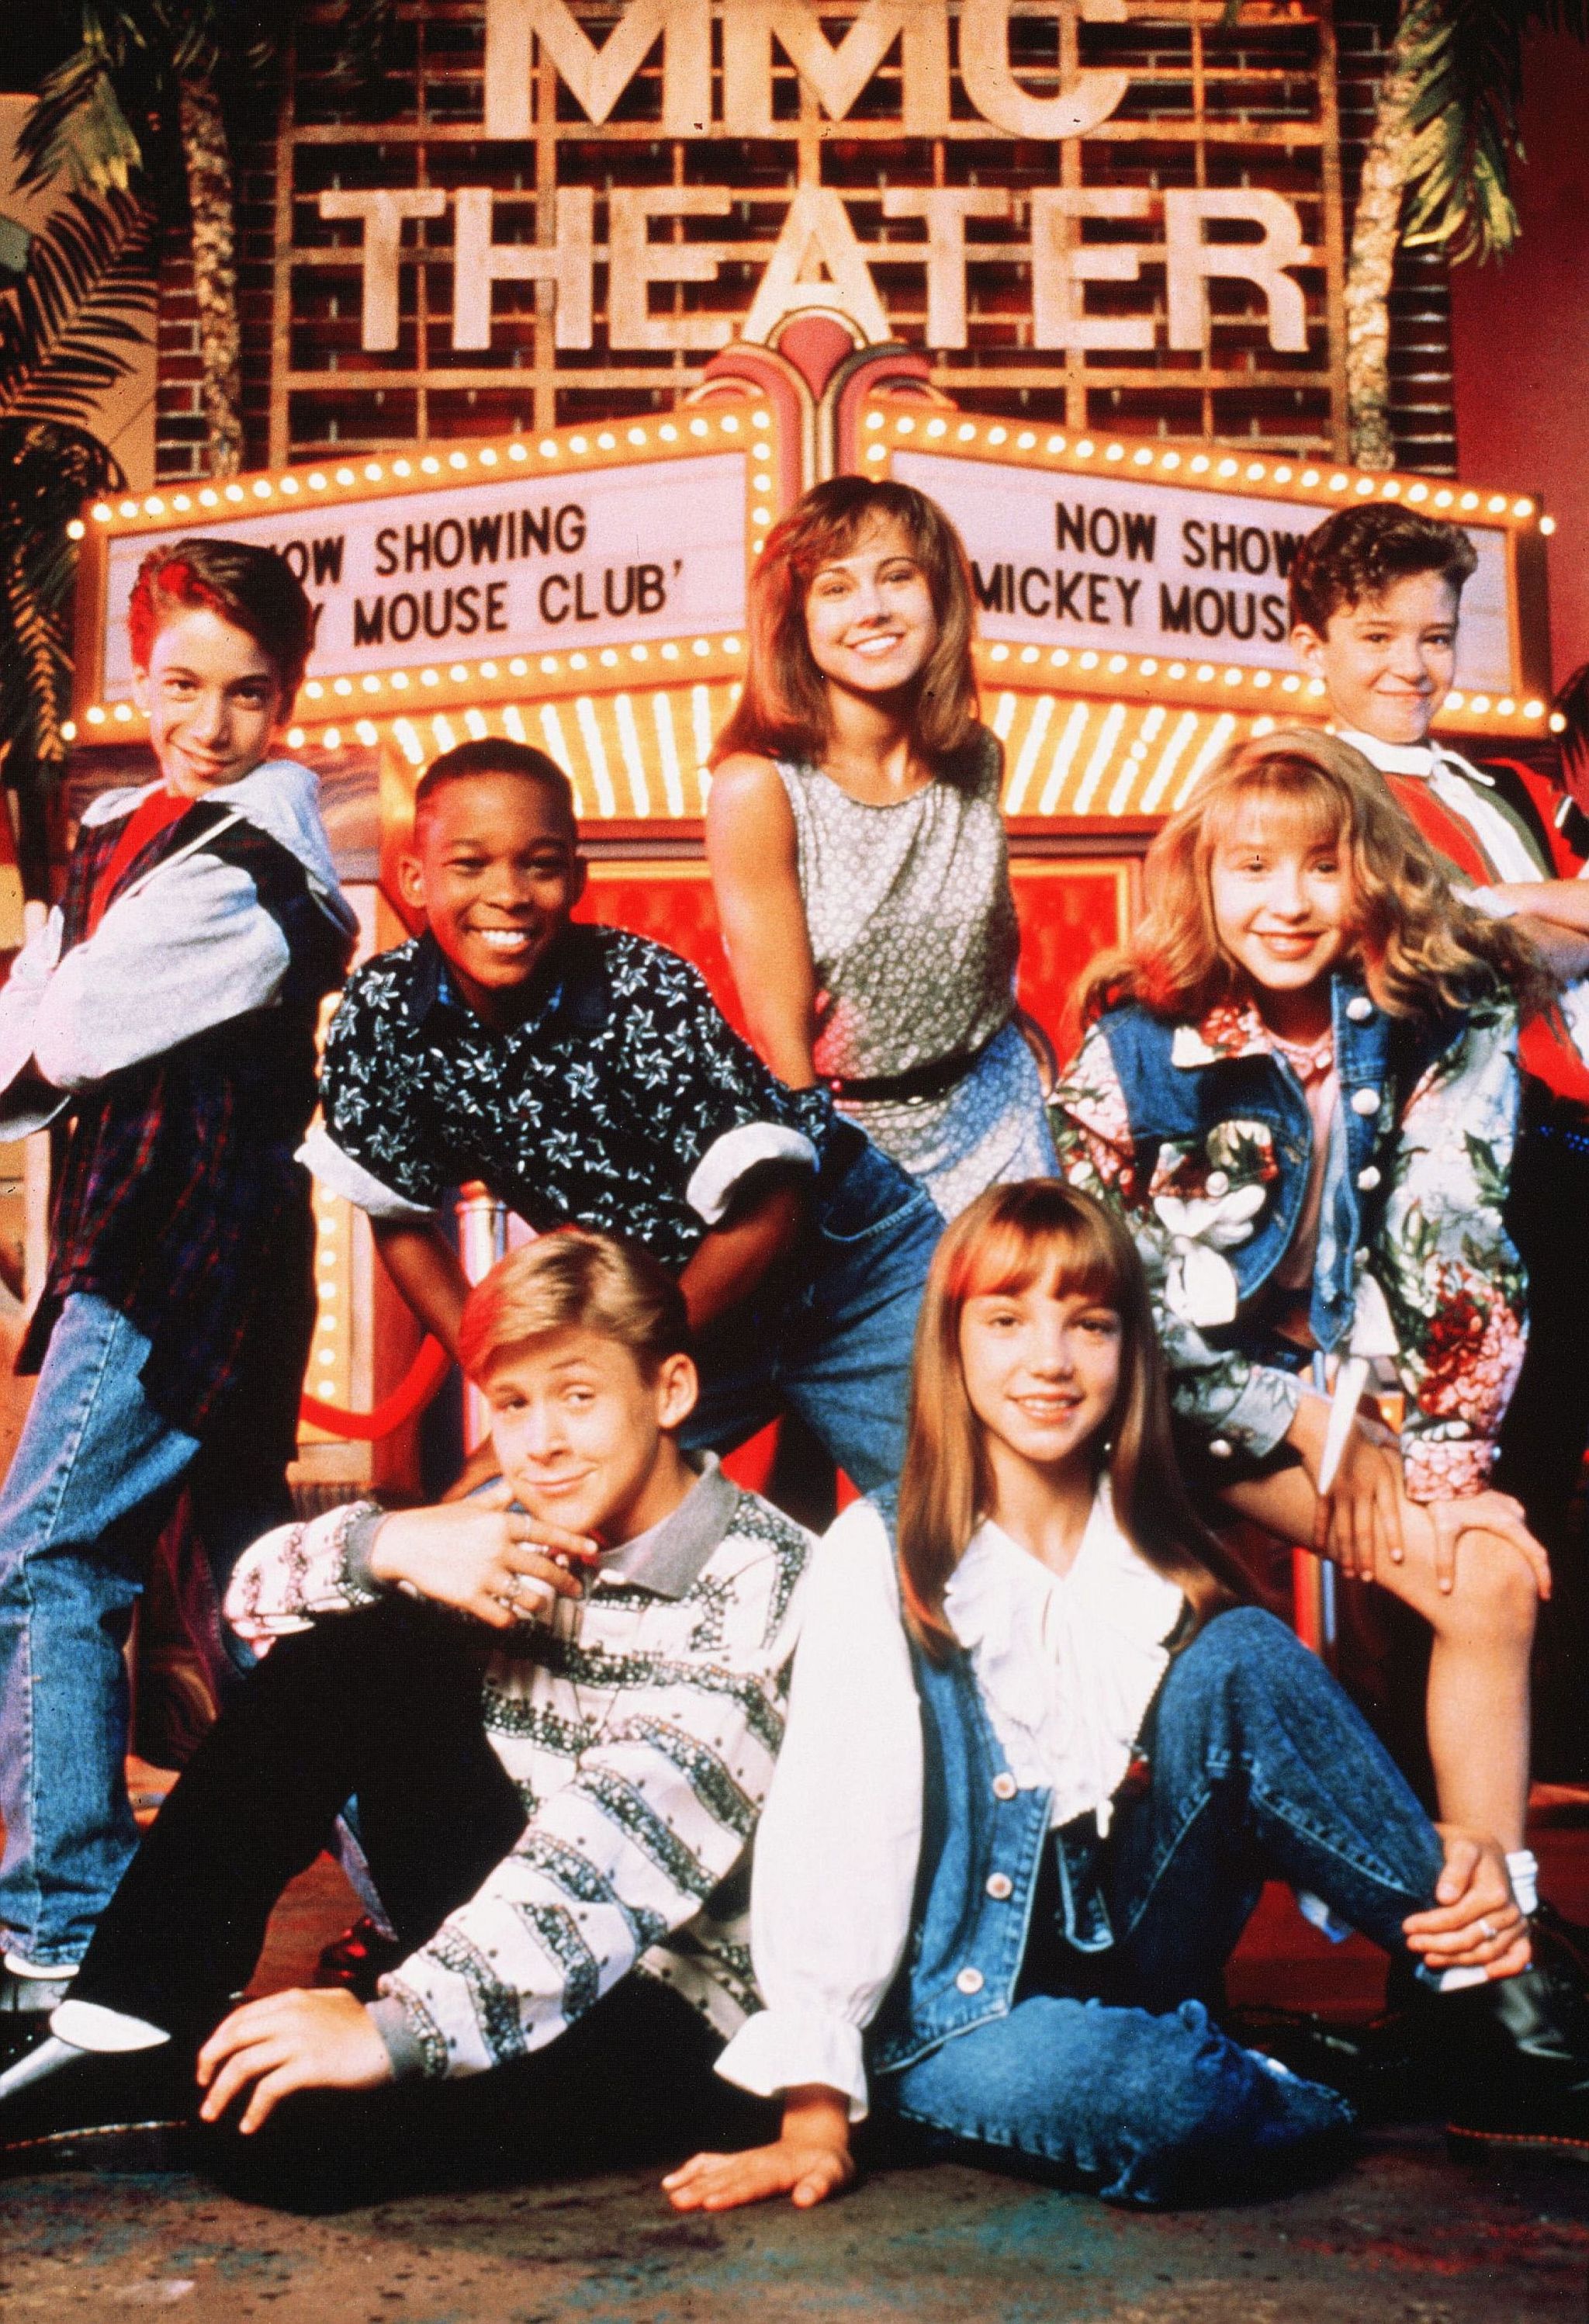 Ryan Gosling, Britney Spears, Christina Aguilera and Justin Timberlake with other Mouseketeers